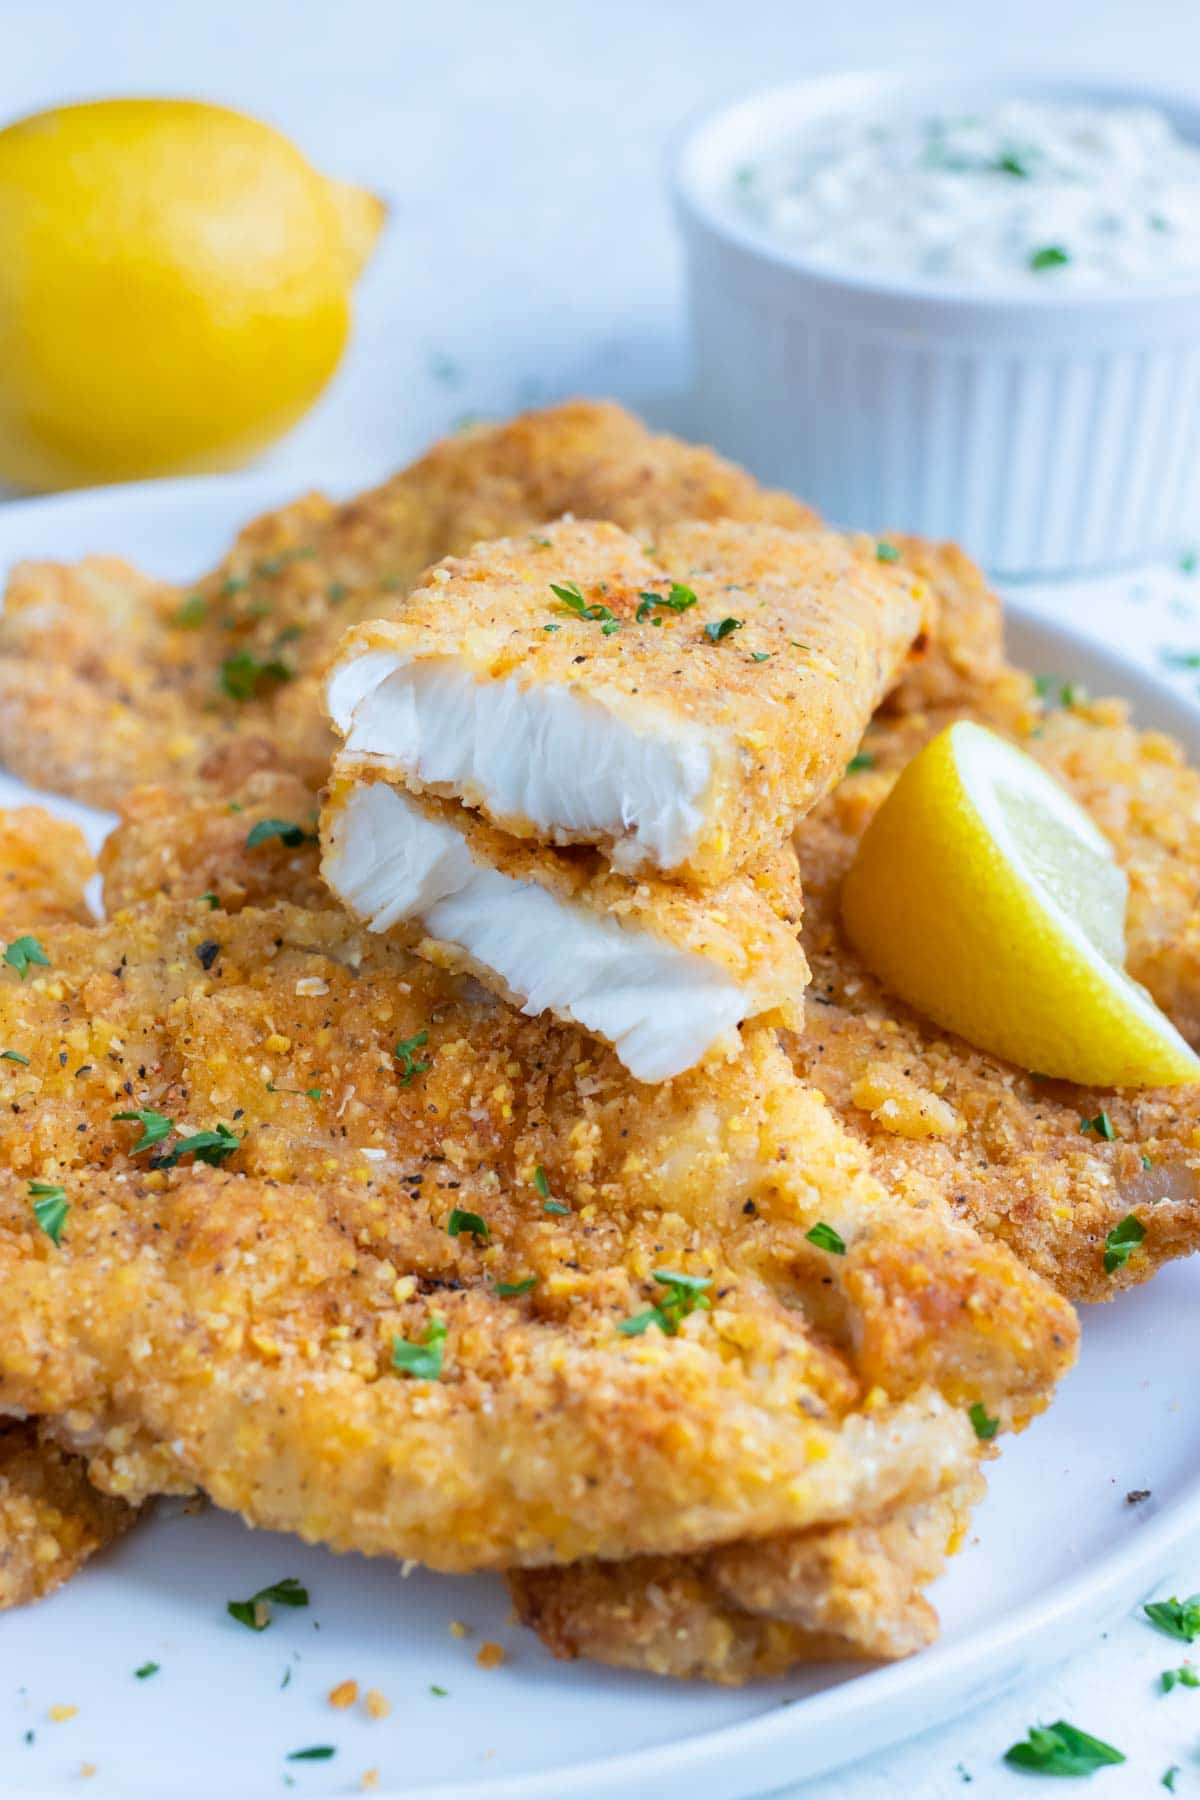 Breaded fish is served on a white plate.